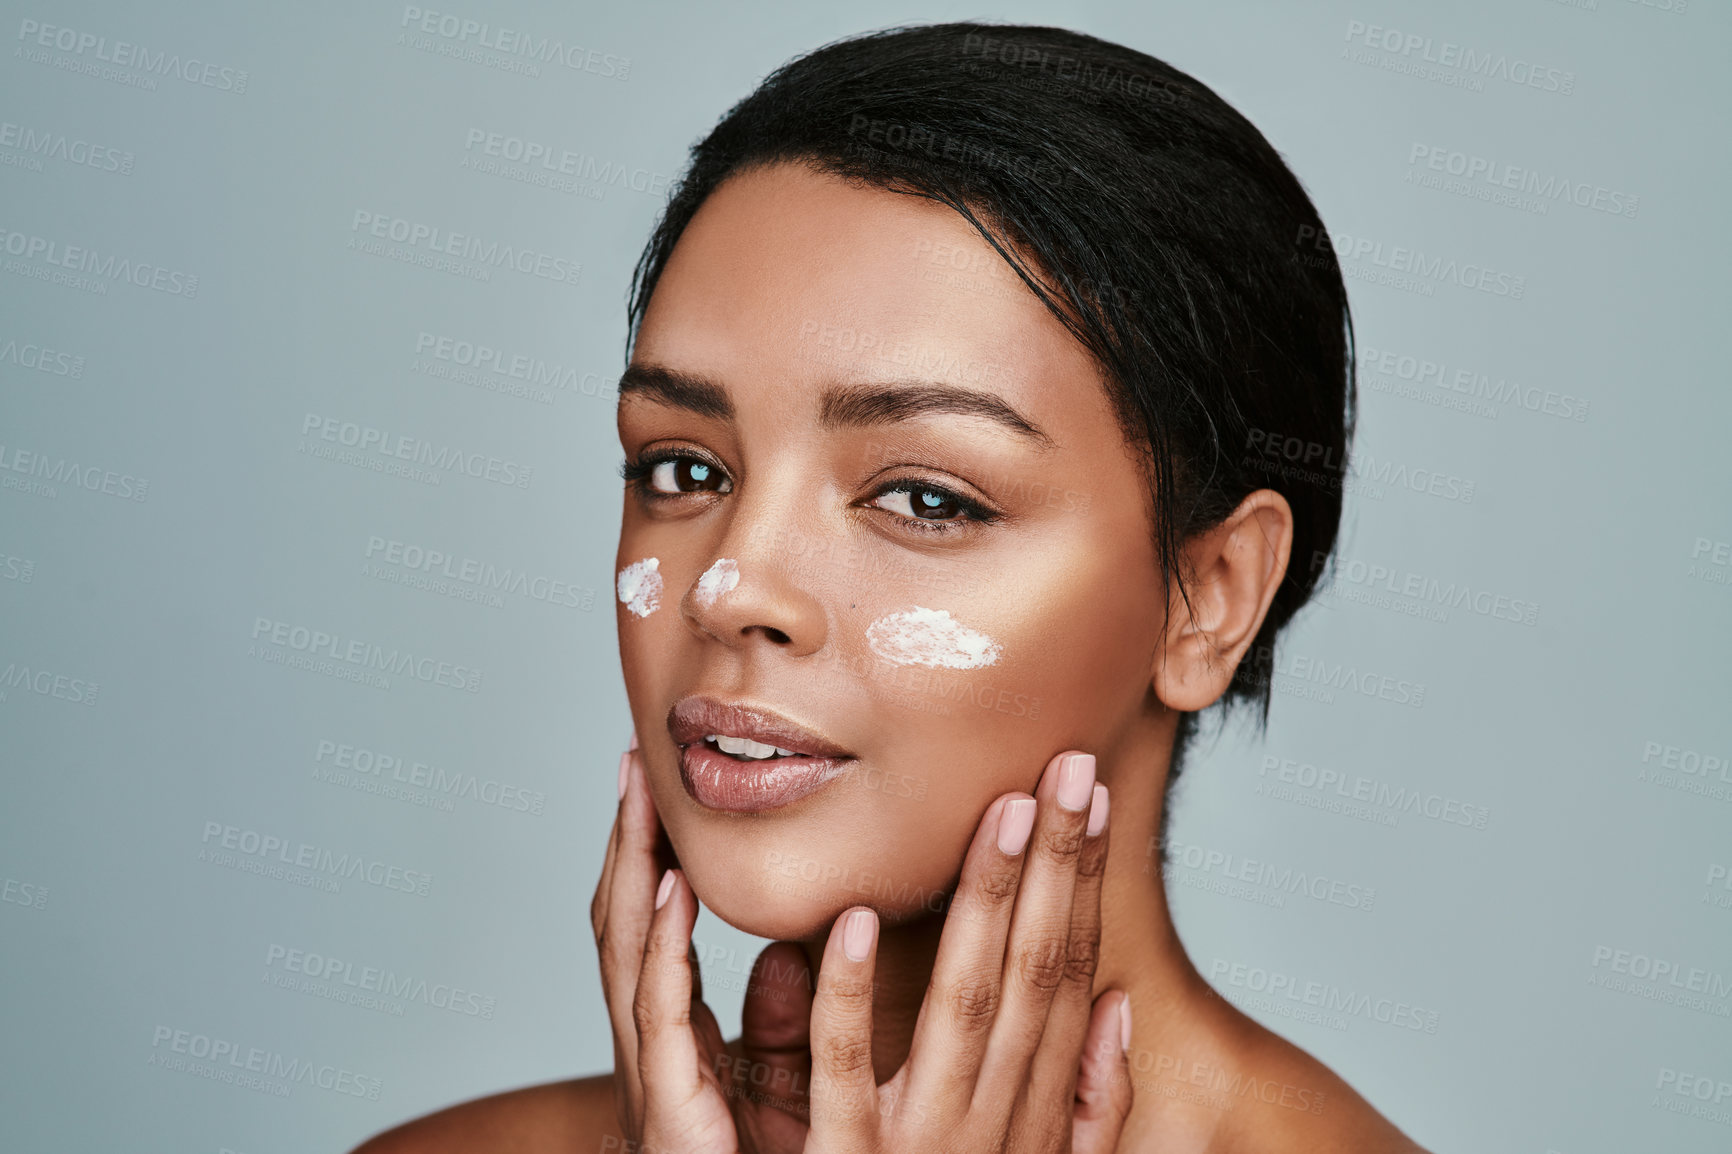 Buy stock photo Shot of a beautiful young woman applying moisturizer to her face